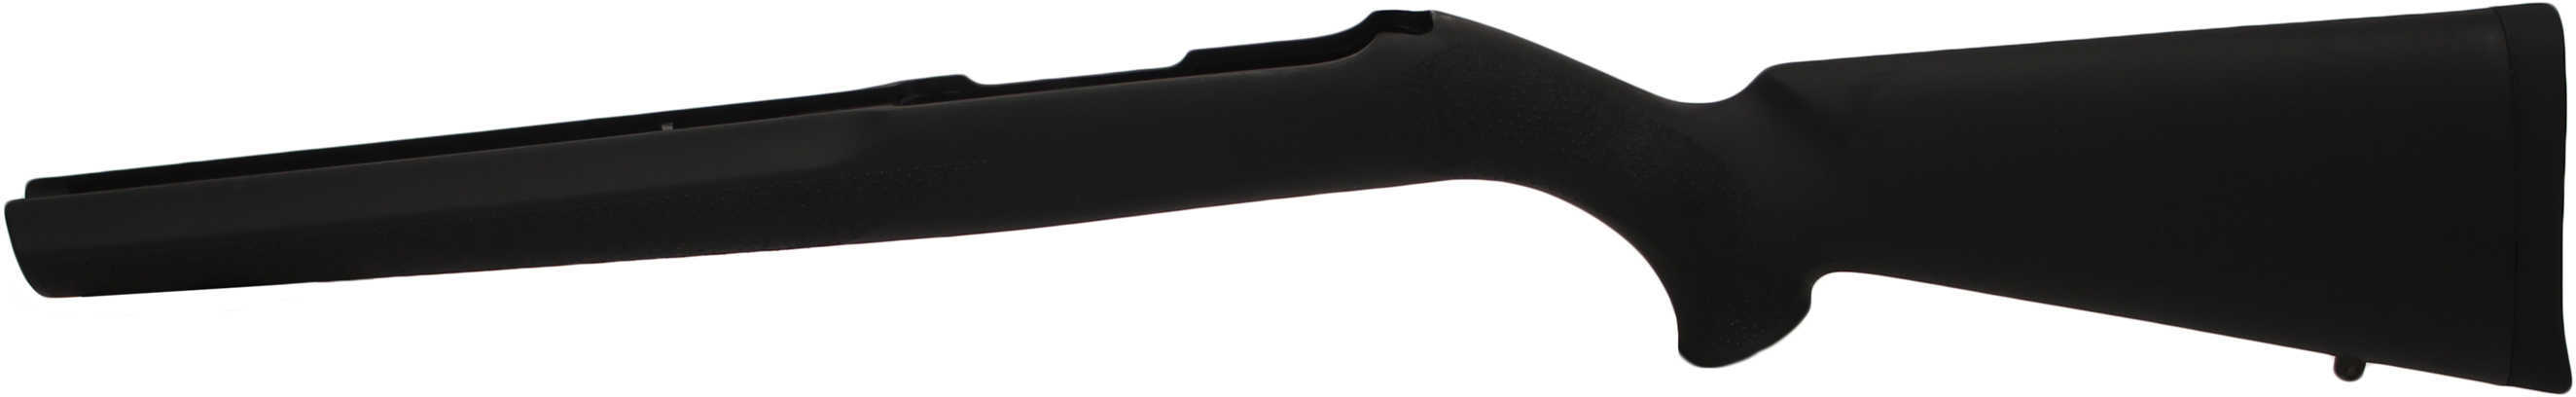 Hogue Overmold Stock For Ruger 10/22 Md: 22010-img-1